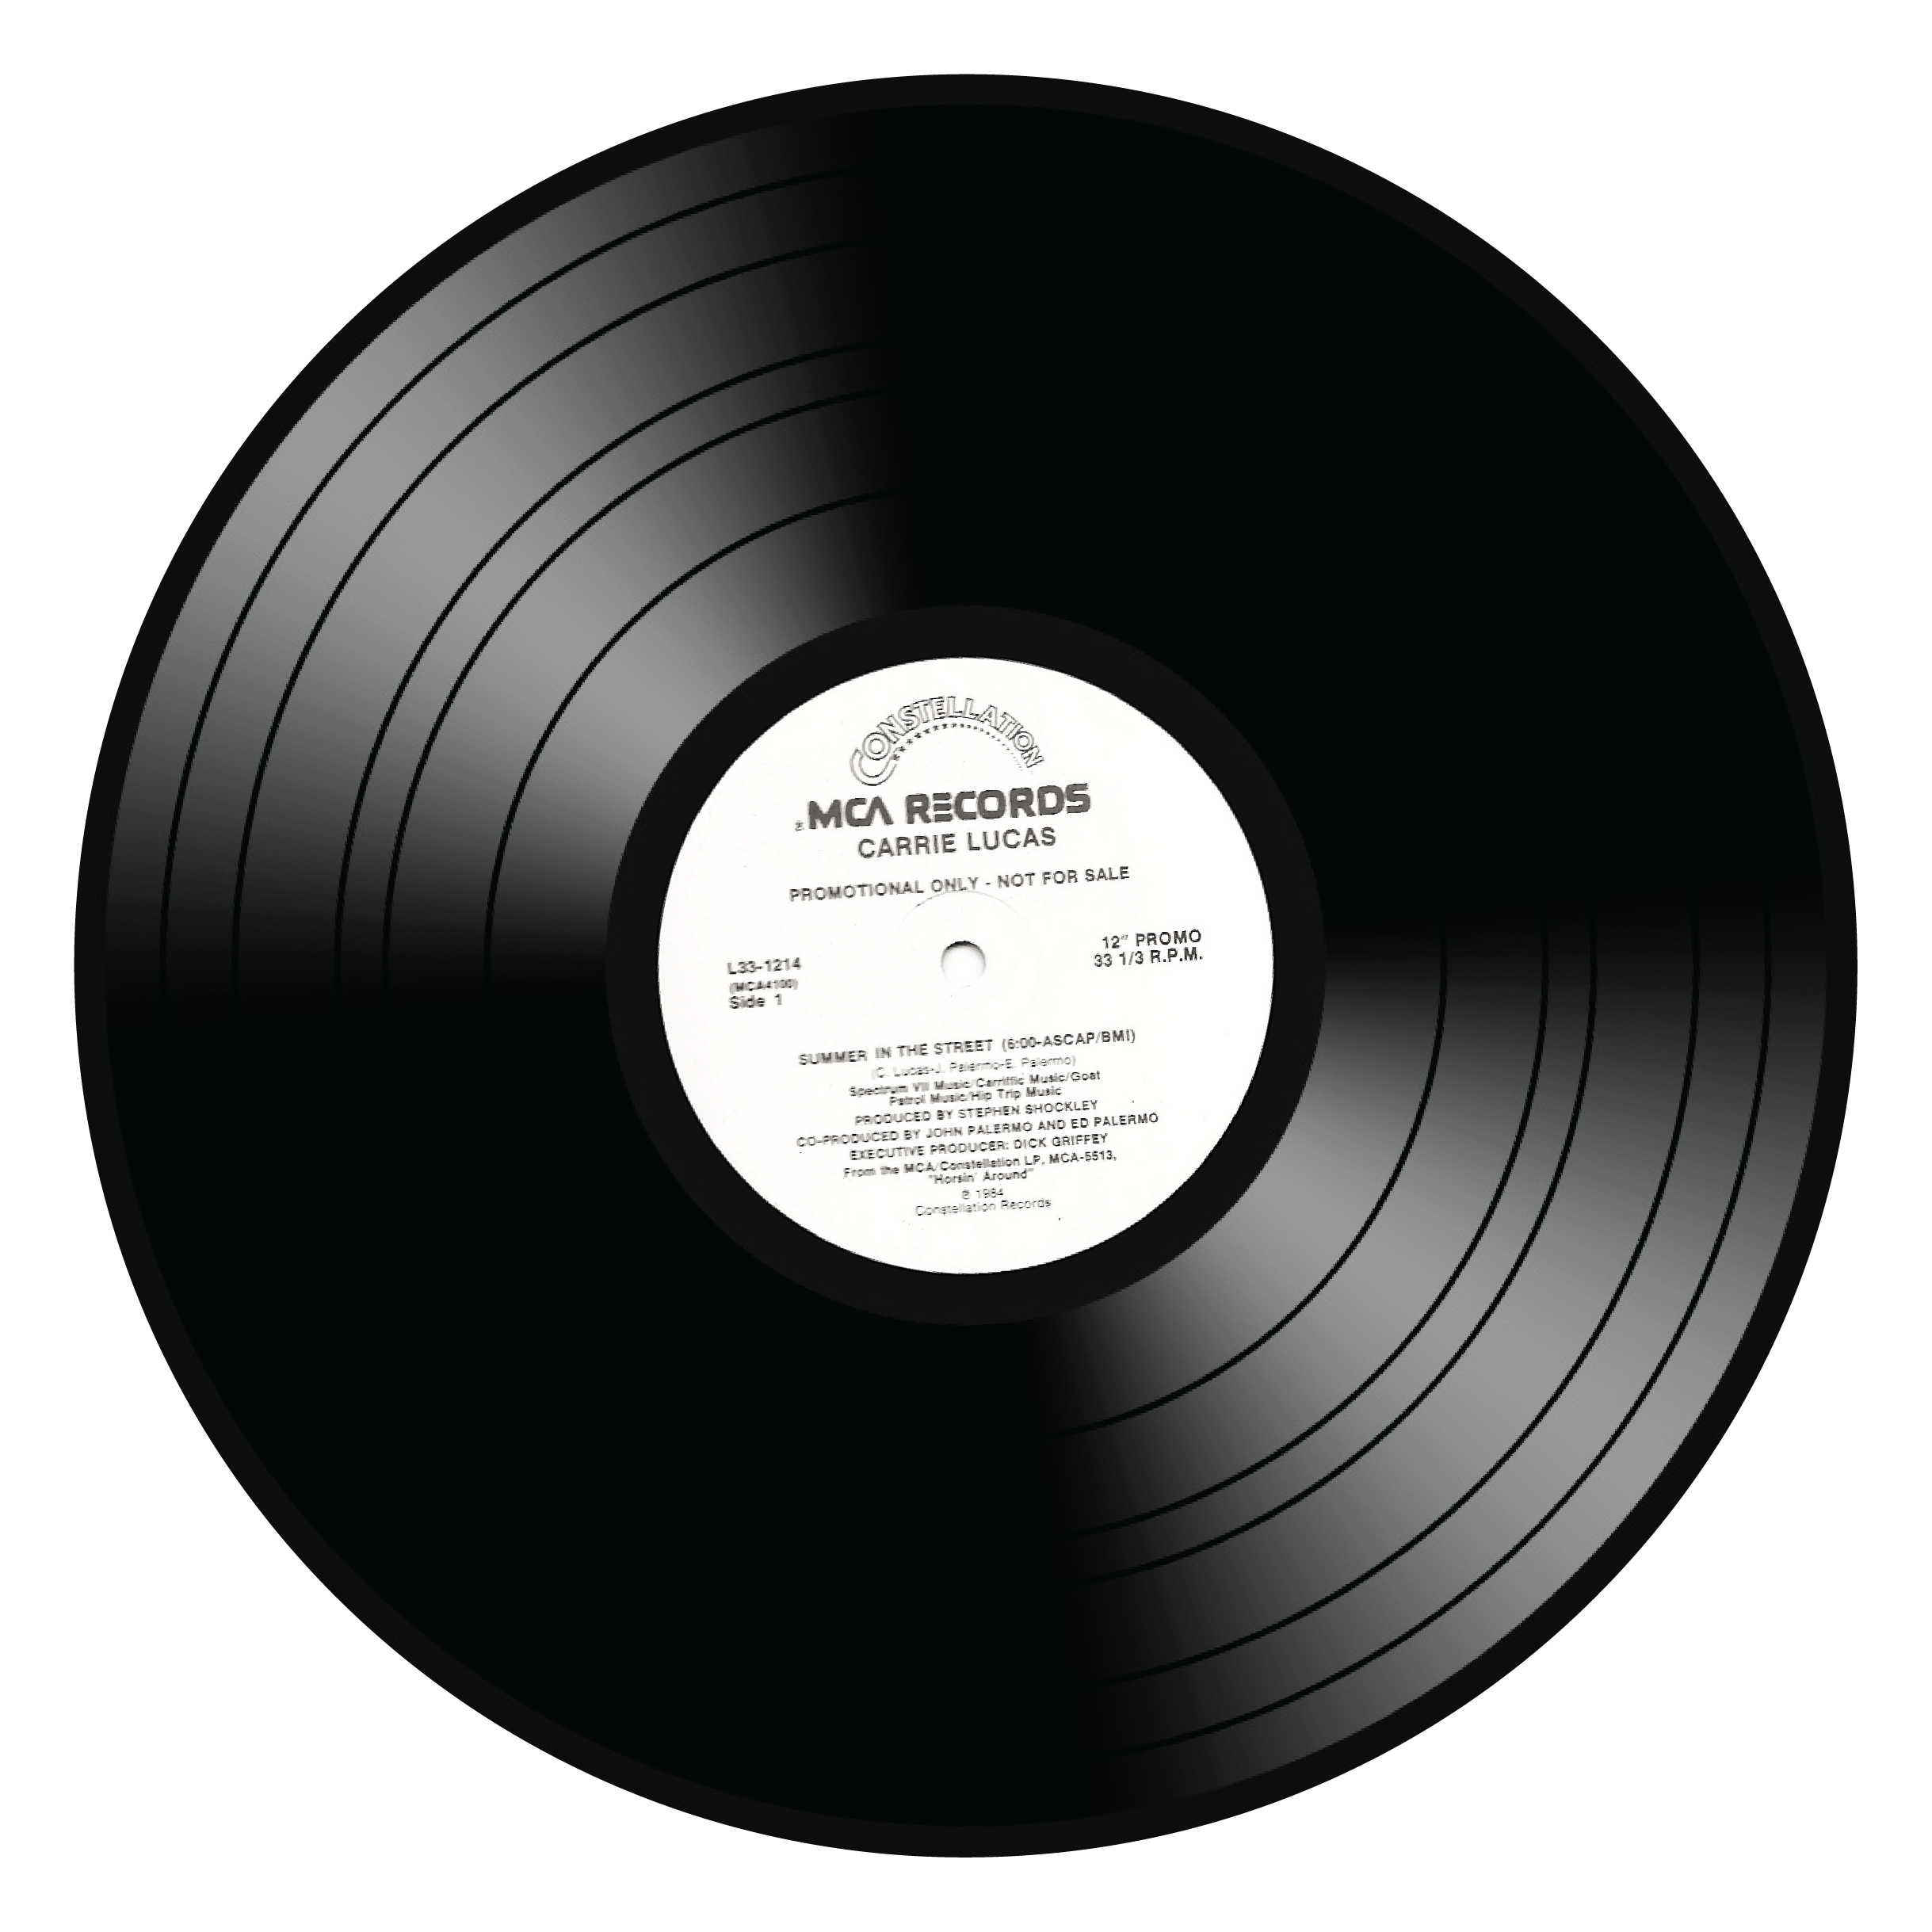 record clipart vintage record